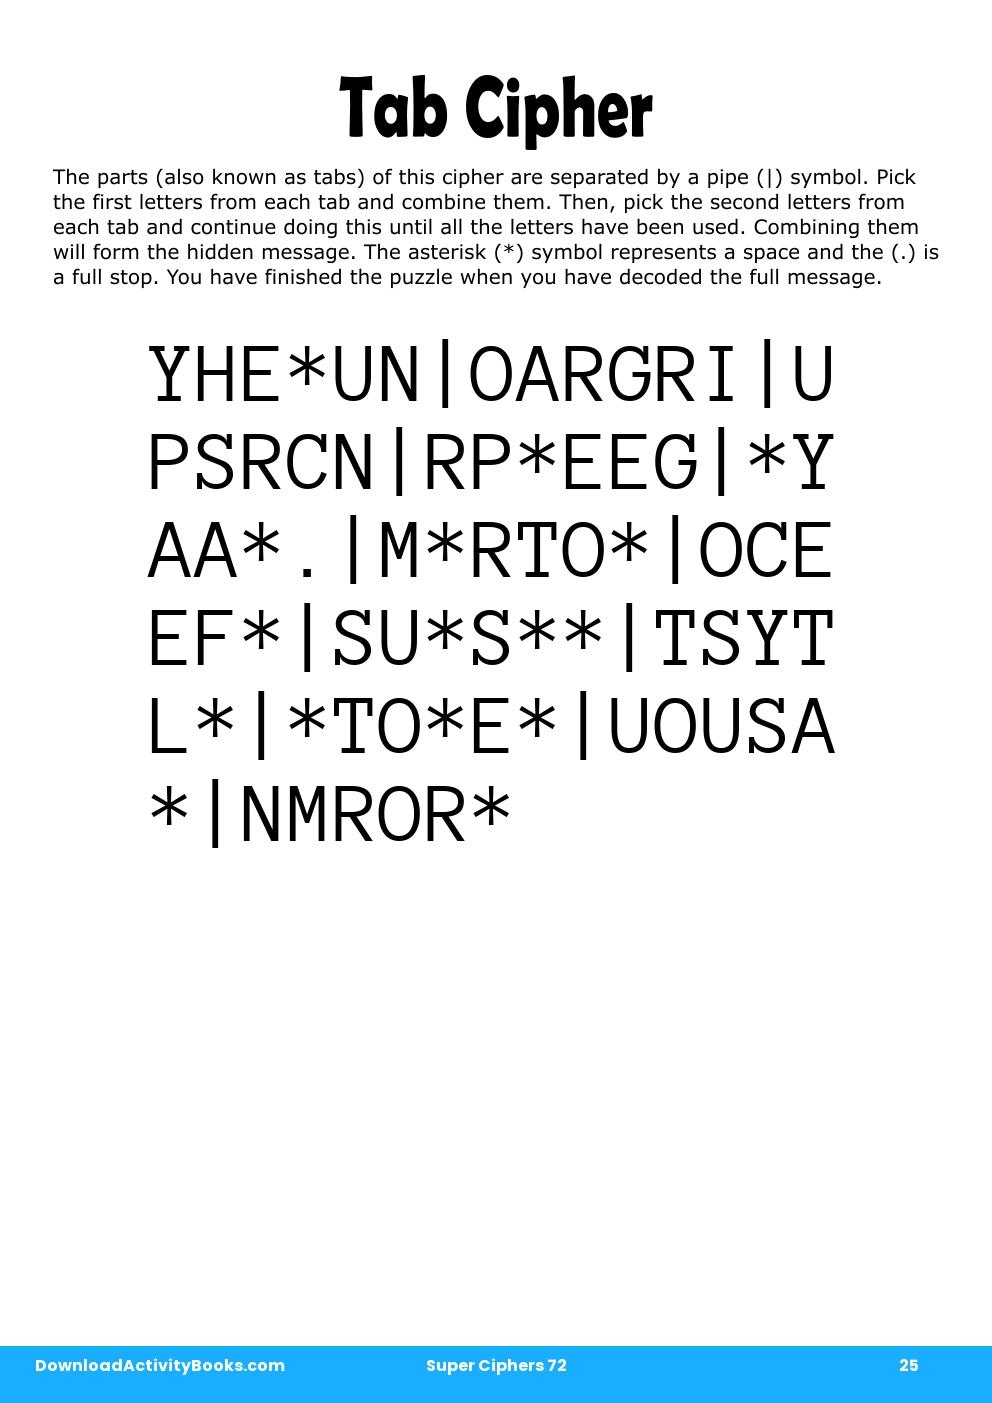 Tab Cipher in Super Ciphers 72